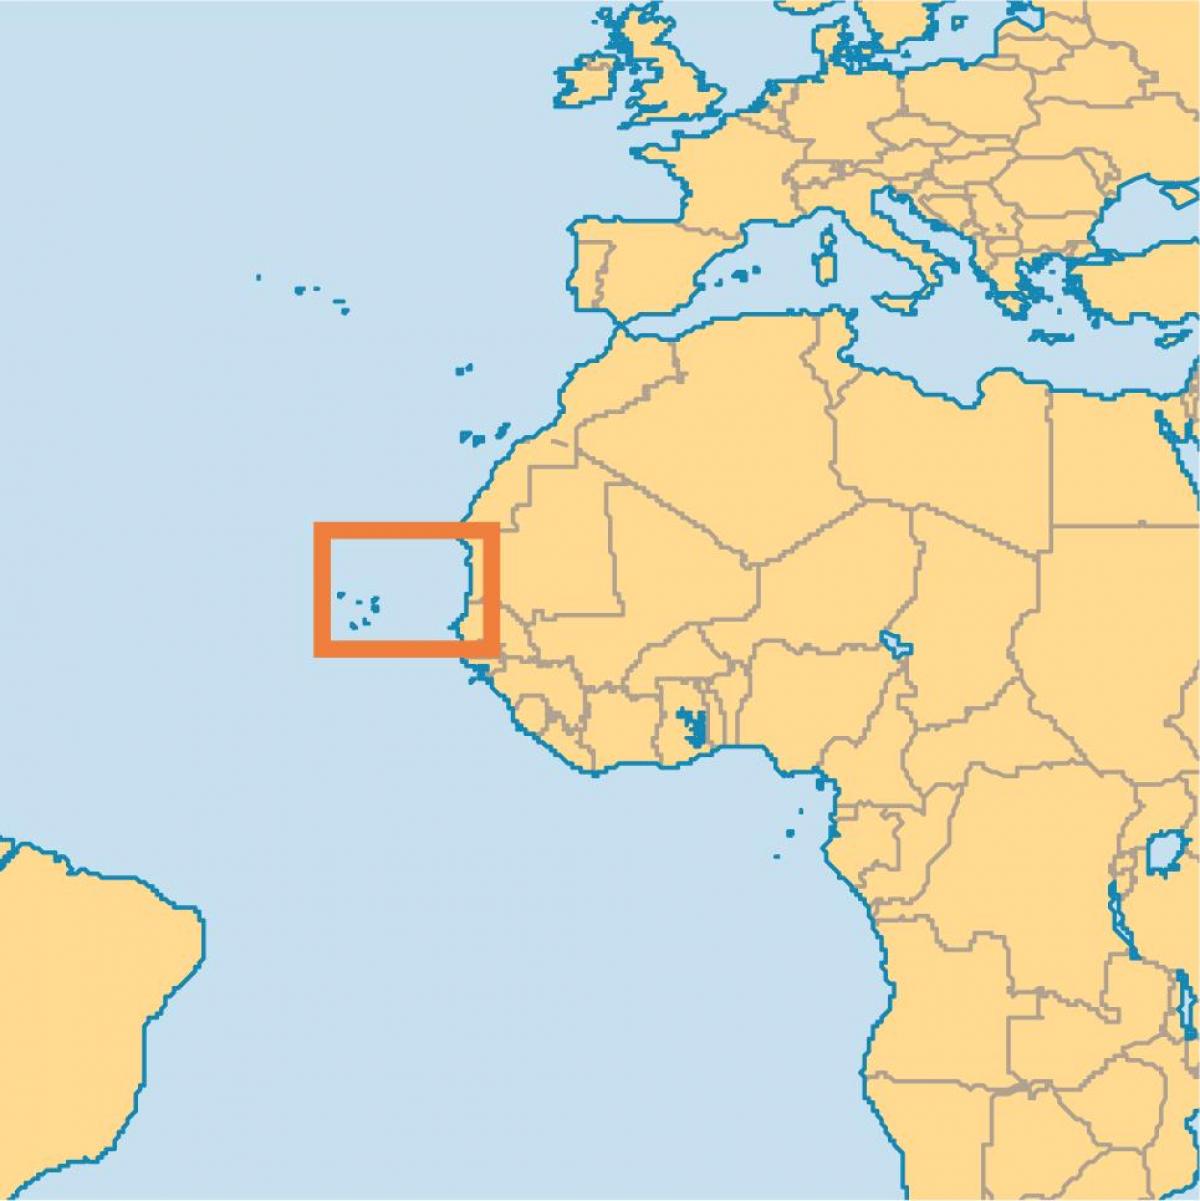 show Cape Verde on world map